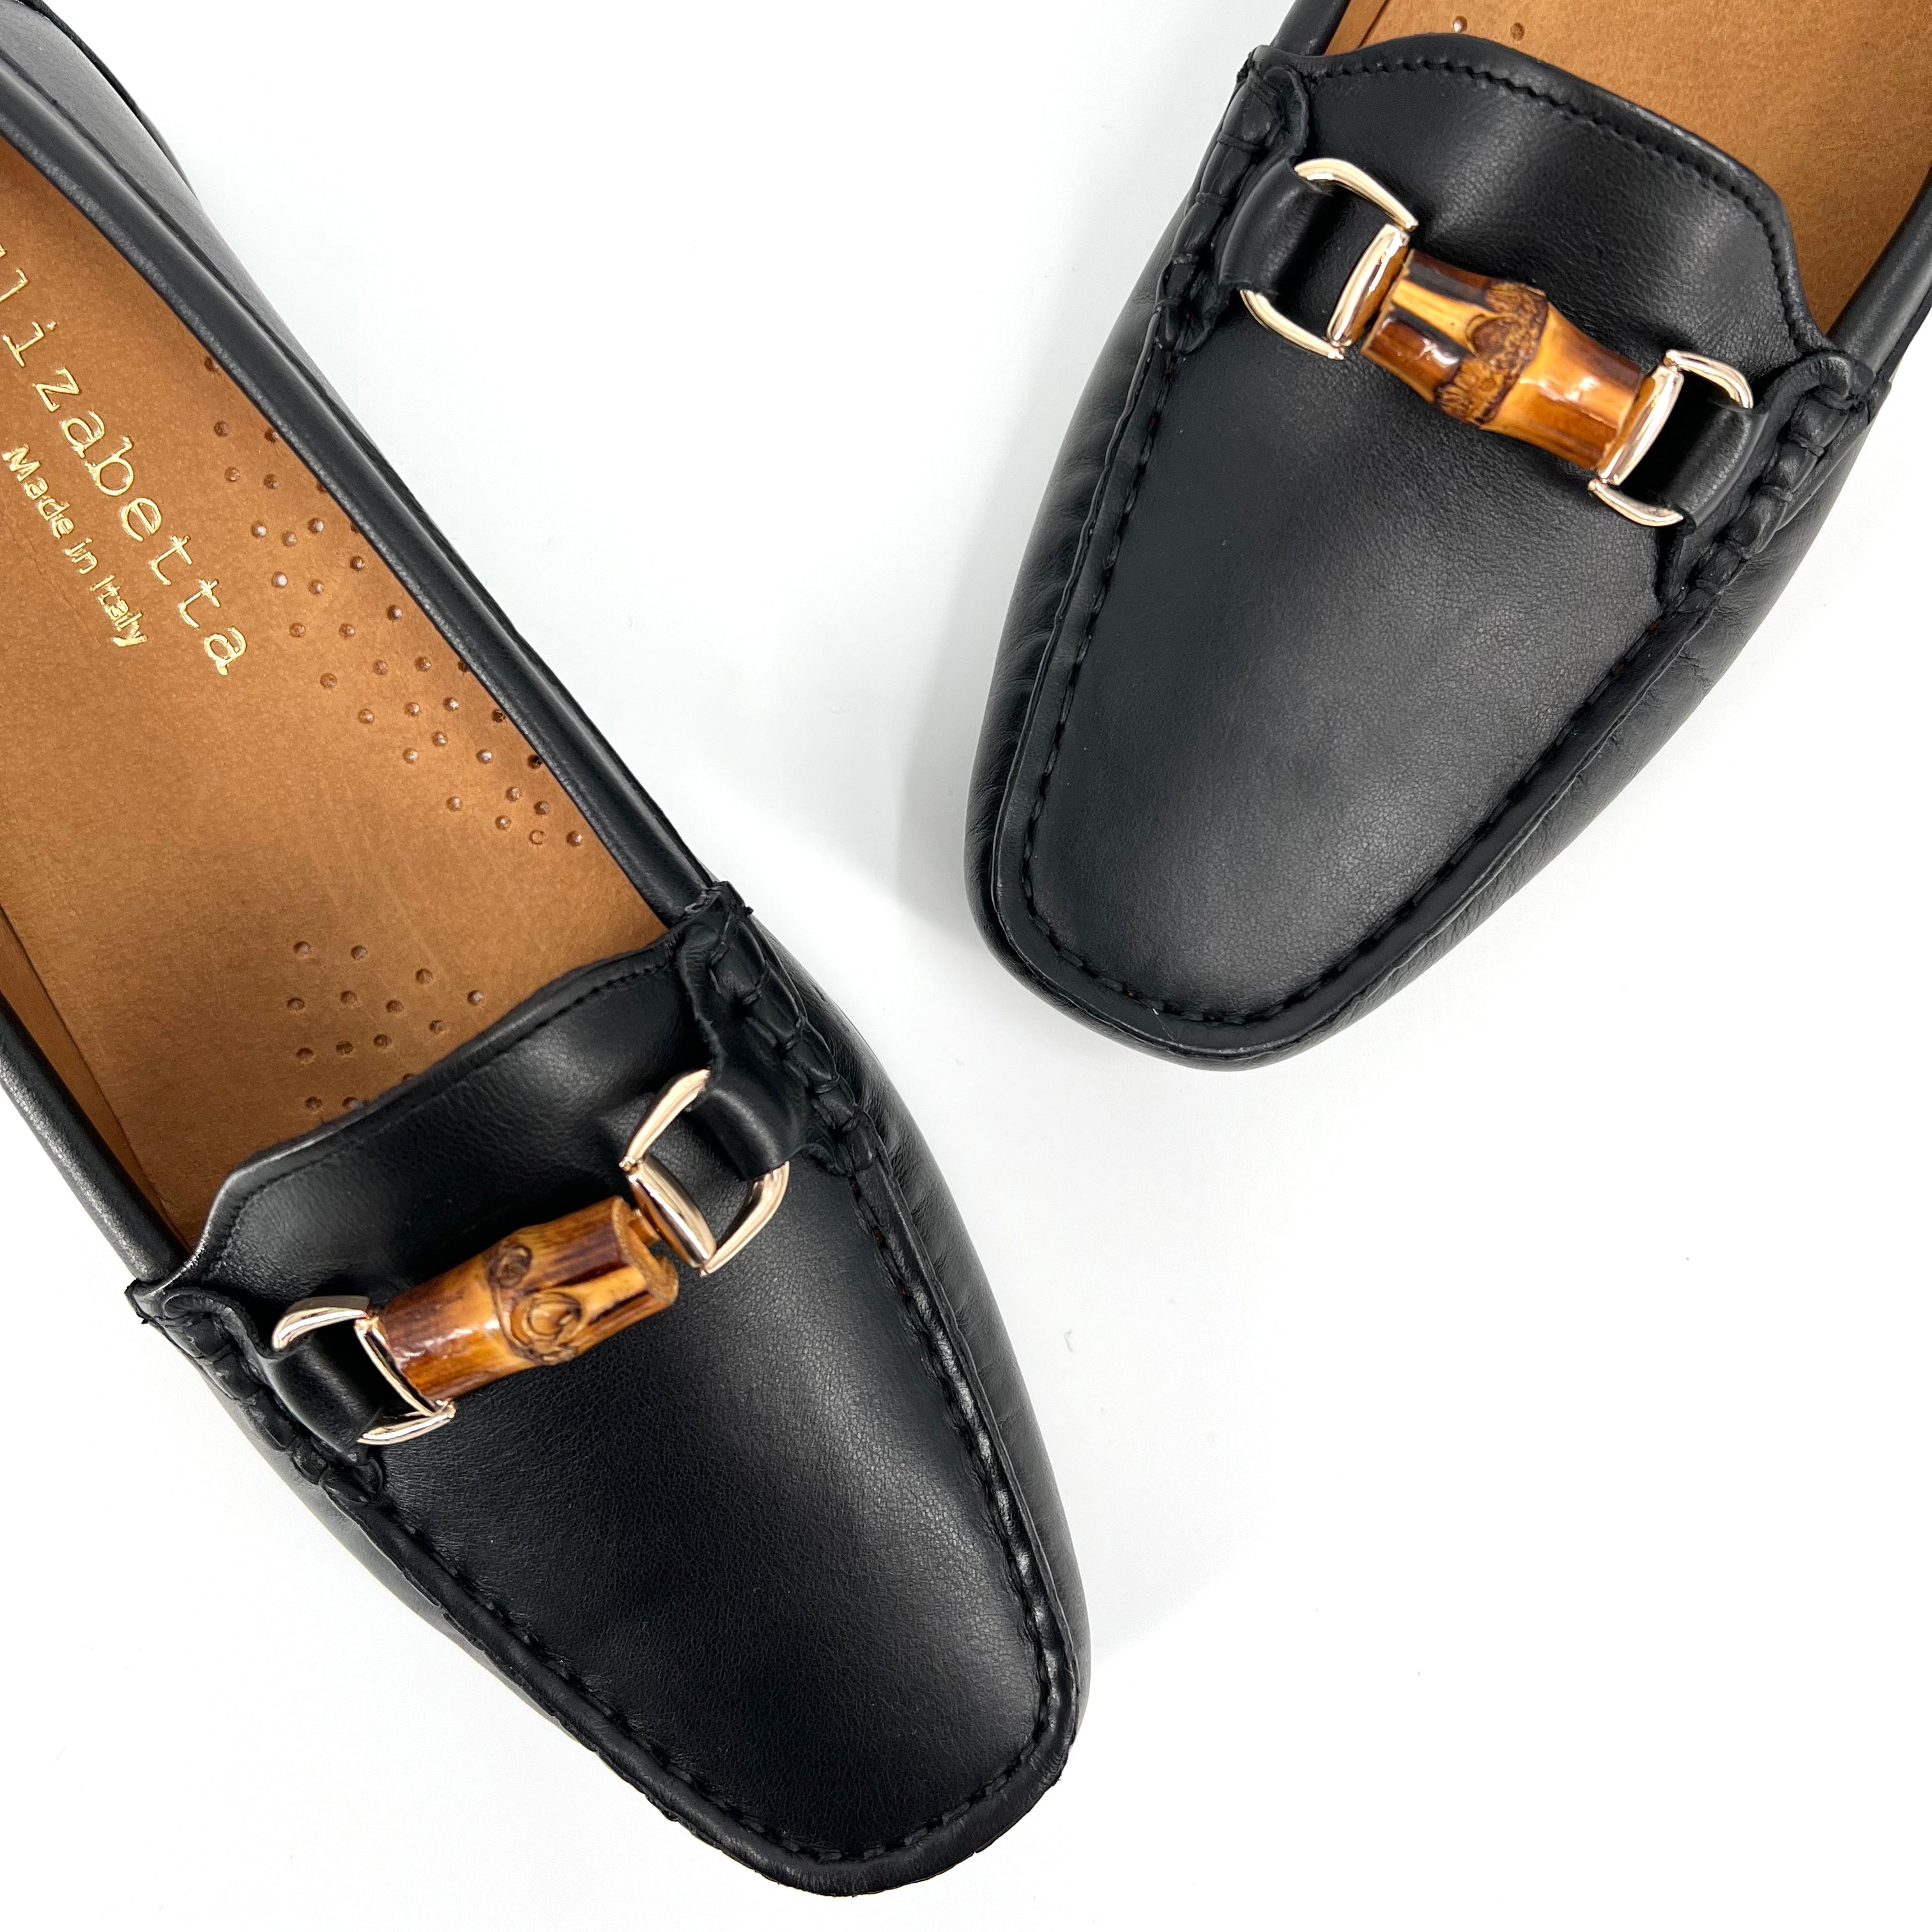 The Moccasin with Bamboo Bit in Black